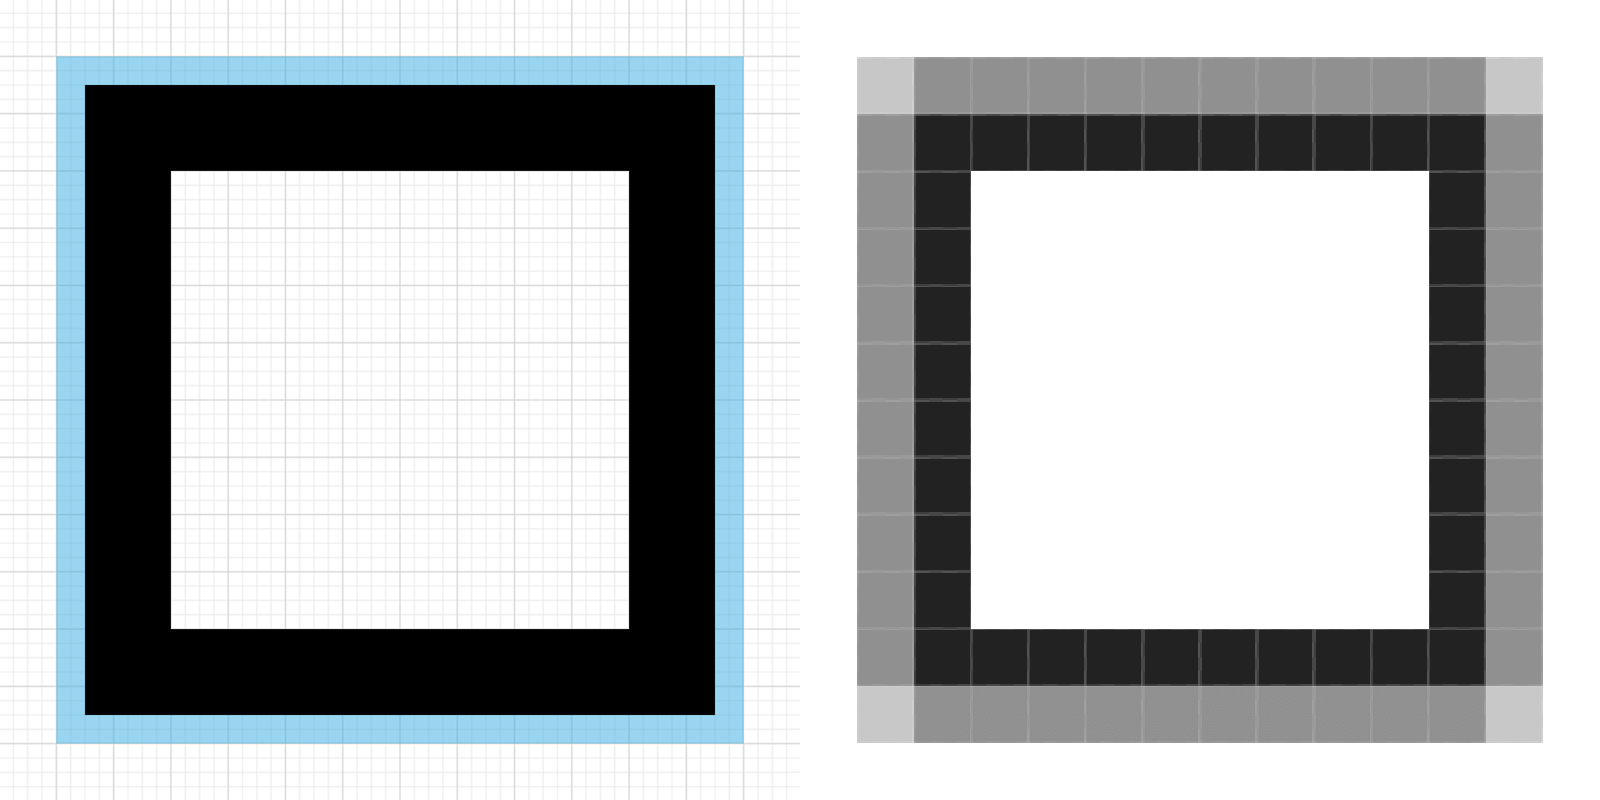 Vector design offset by a half-pixel on the outside, causing blurred pixels on the outer border.